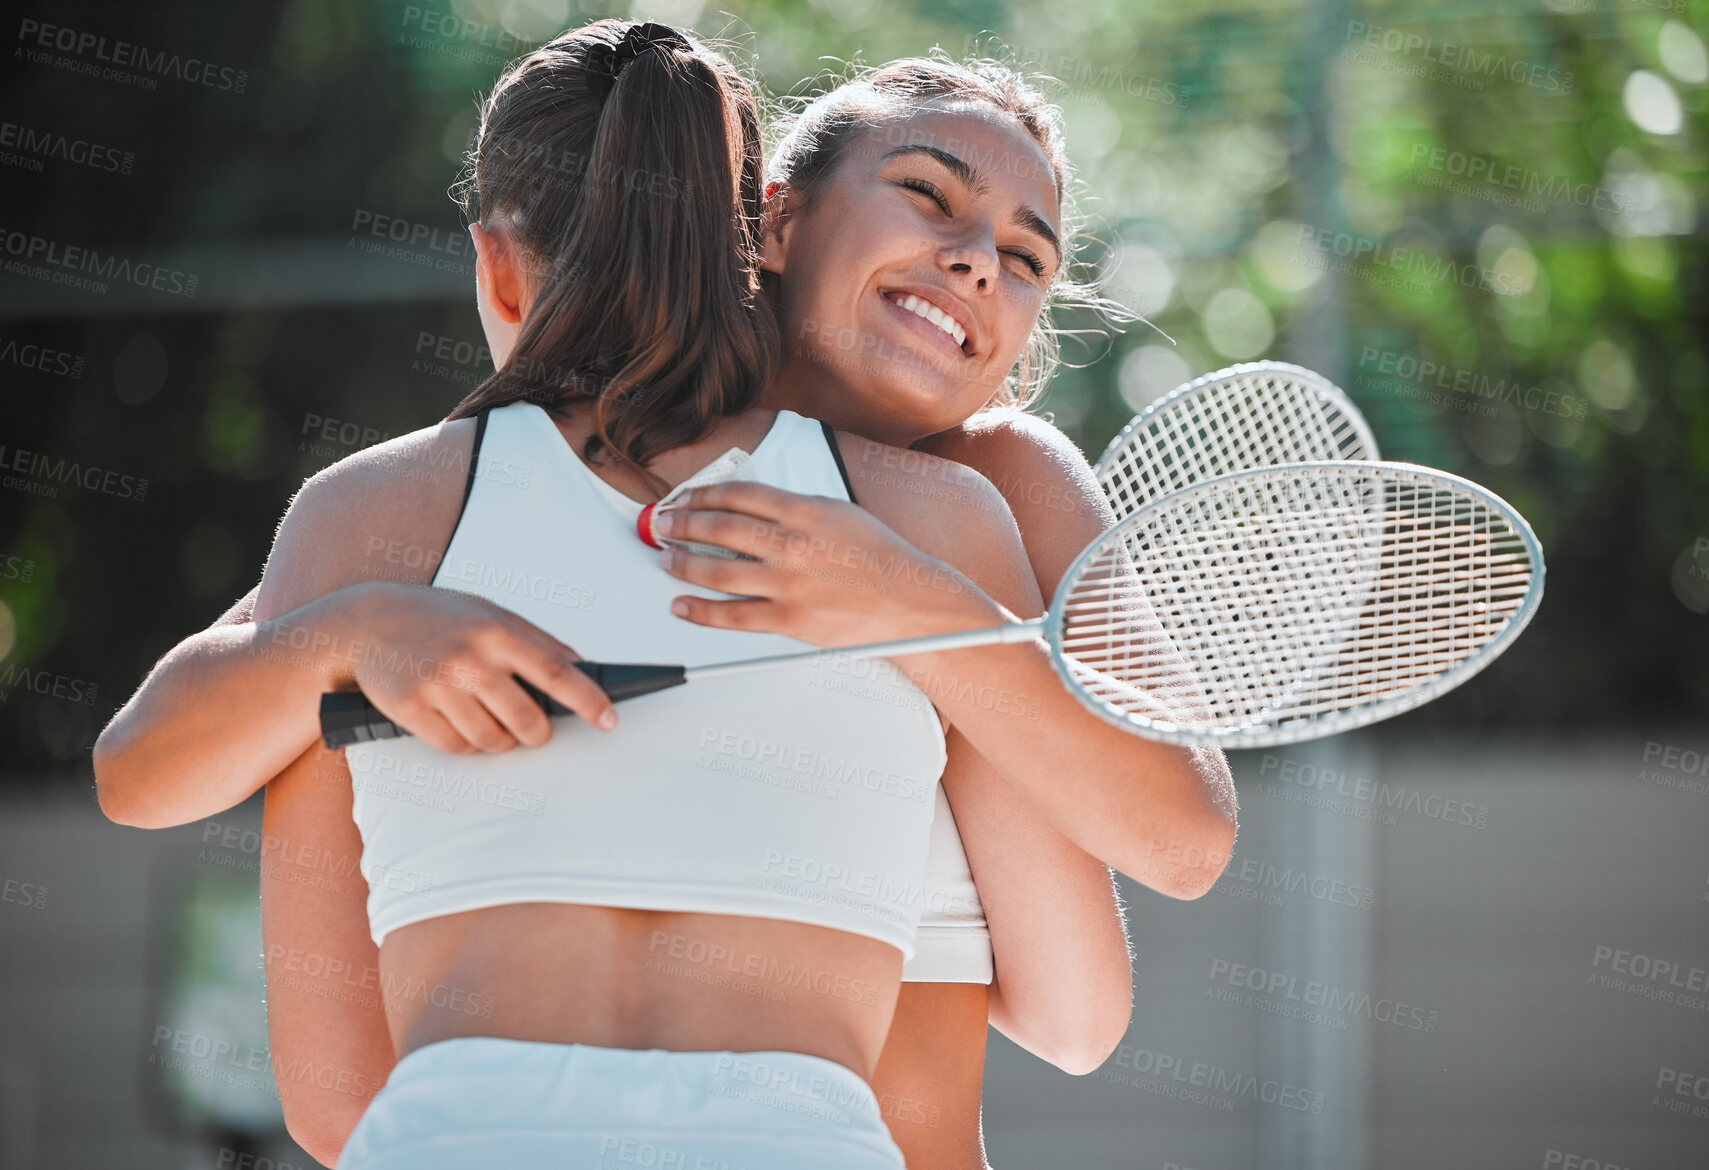 Buy stock photo Badminton, happy and sports friends hug together for bond, love and care with smile on game break. Exercise, workout and happiness in women friendship with embrace on outdoor summer court.

